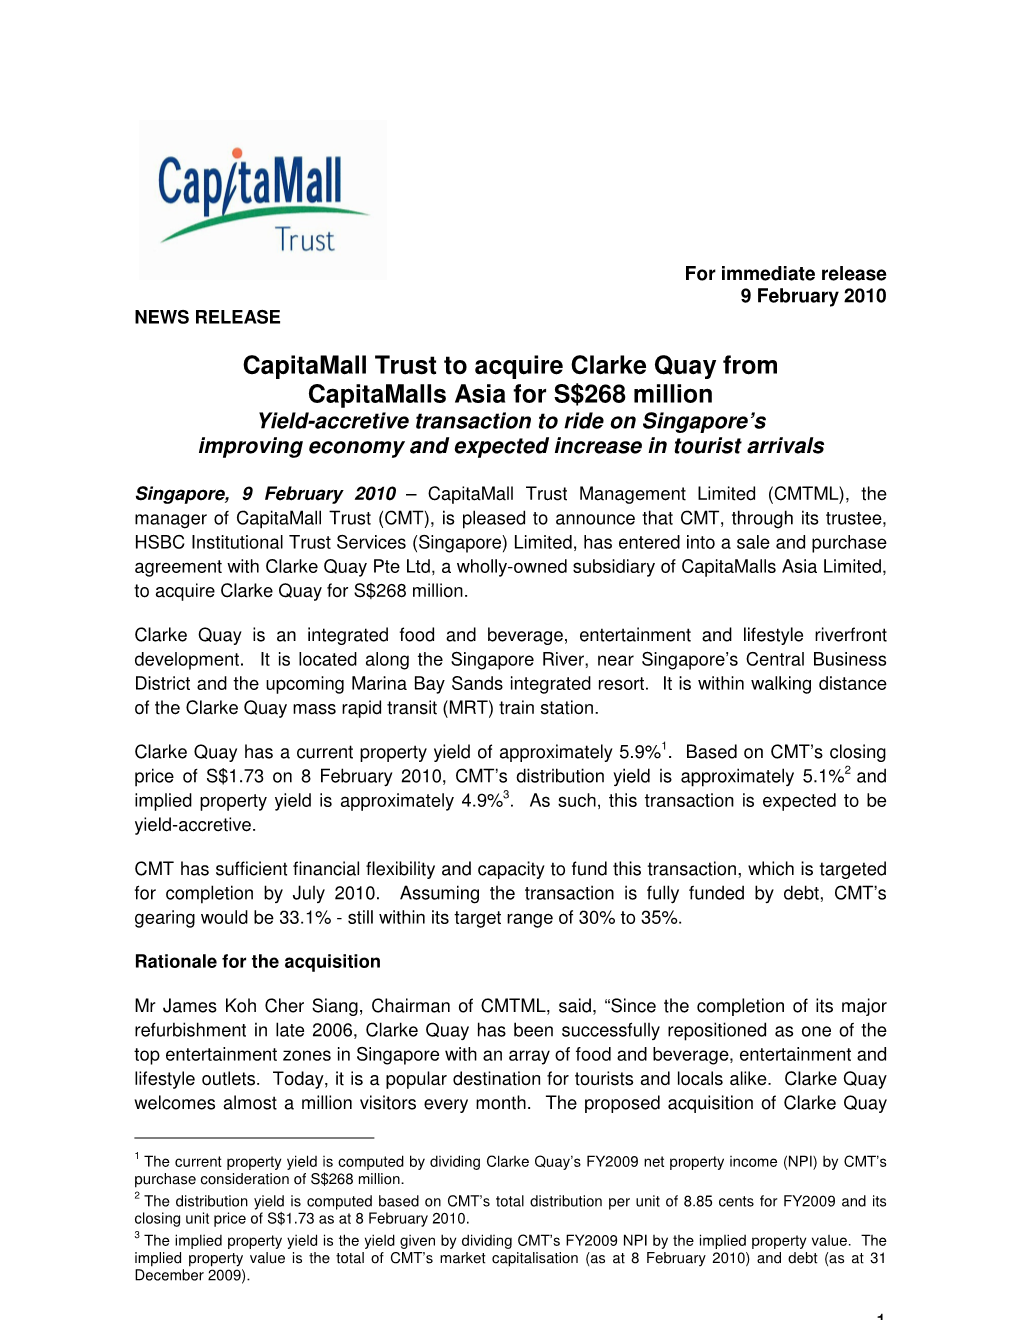 Capitamall Trust to Acquire Clarke Quay from Capitamalls Asia for S